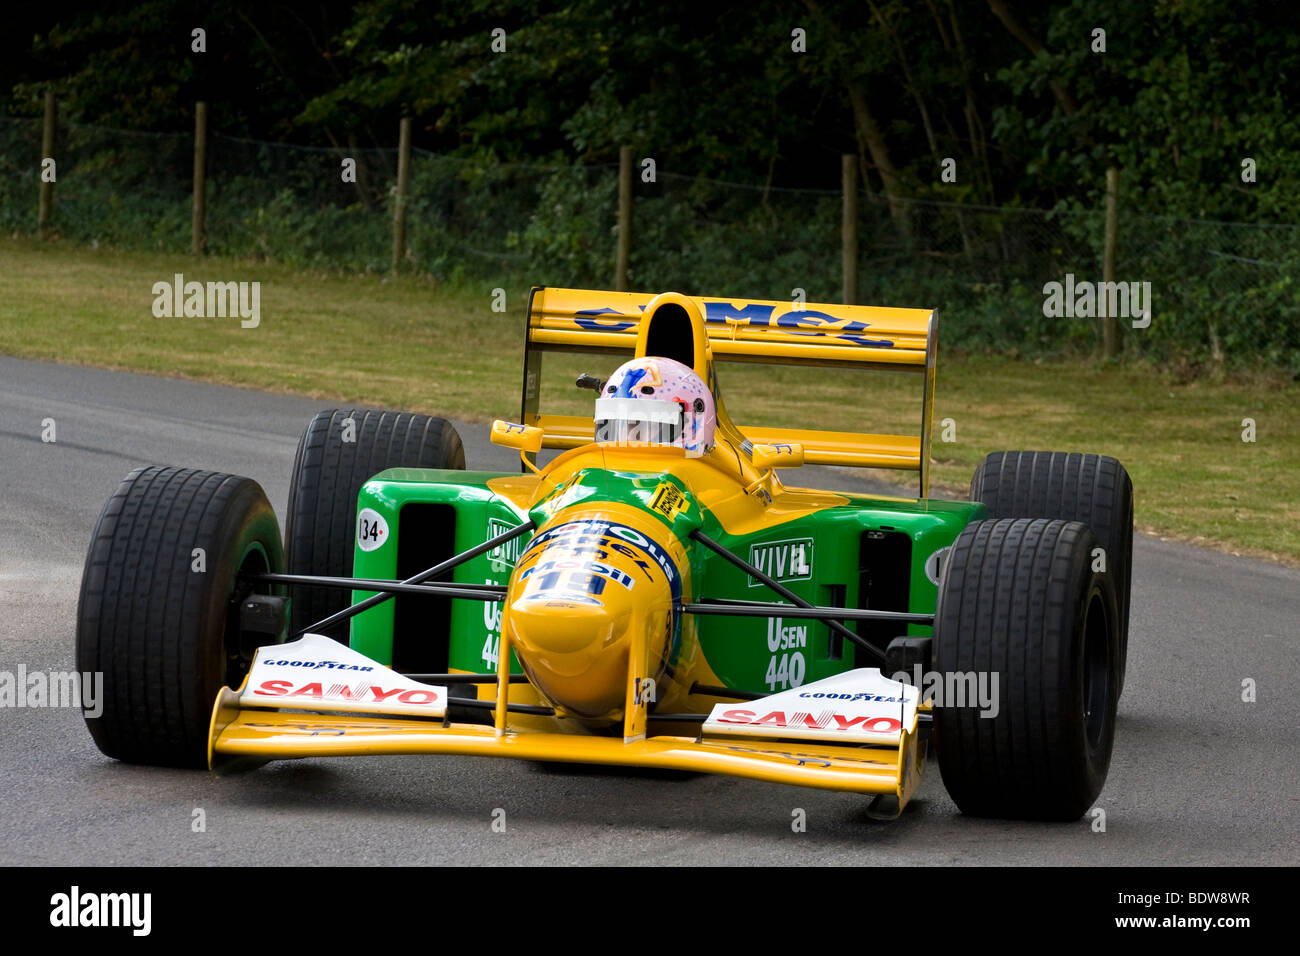 1992 Benetton-Ford B192 F1 car on the hillclimb at Goodwood Festival of Speed, Sussex, UK. Driver: Lorina McLaughlin Stock Photo